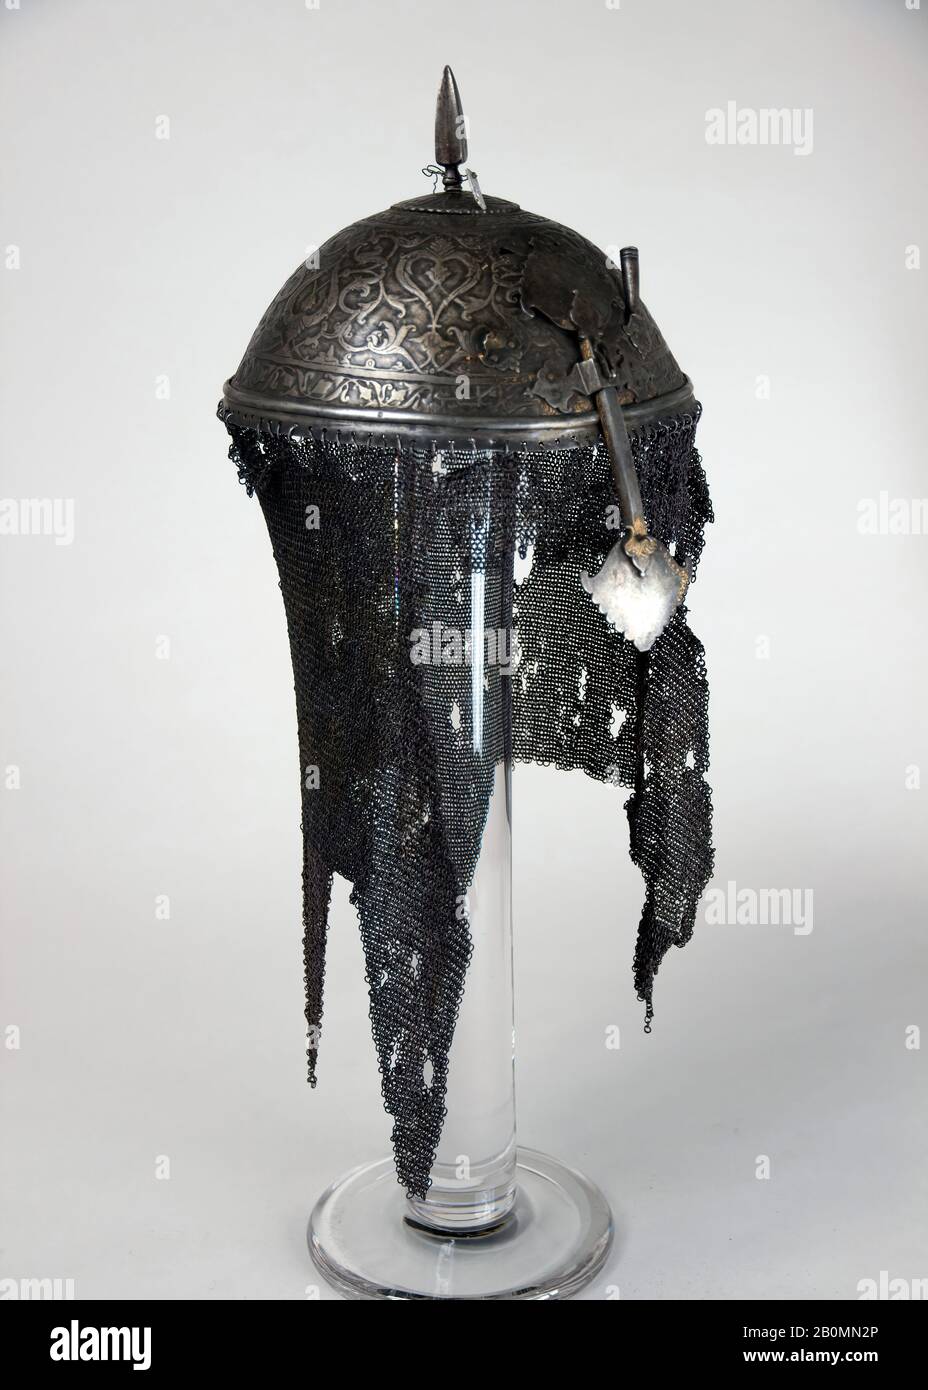 Helmet and Cuirass, Indian, 18th–19th century, Indian, Steel, Helmet (a); H. including mail 18 1/2 in. (47 cm); H. including nasal 8 3/4 in. (22.2 cm); H. excluding mail and nasal 5 3/4 in. (14.6 cm); W. 8 in. (20.3 cm); D. 8 1/2 in. (21.6 cm); Wt. 2 lb. 0.8 oz. (929.9 g); cuirass panel (b); H. 10 3/4 in. (27.3 cm); W. 8 1/4 in. (21 cm); D. 1 1/2 in. (3.8 cm); Wt. 1 lb. 9.5 oz. (722.9 g); cuirass panel (c); H. 10 1/4 in. (26 cm); W. 6 1/4 in. (15.9 cm); D. 2 in. (5.1 cm); Wt. 1 lb. 13.3 oz. (547.1 g); cuirass panel (d); H. 11 in. (27.9 cm); W. 8 1/2 in. (21.6 cm); D. 1 1/2 in. (3.8 cm); Wt. 1 Stock Photo